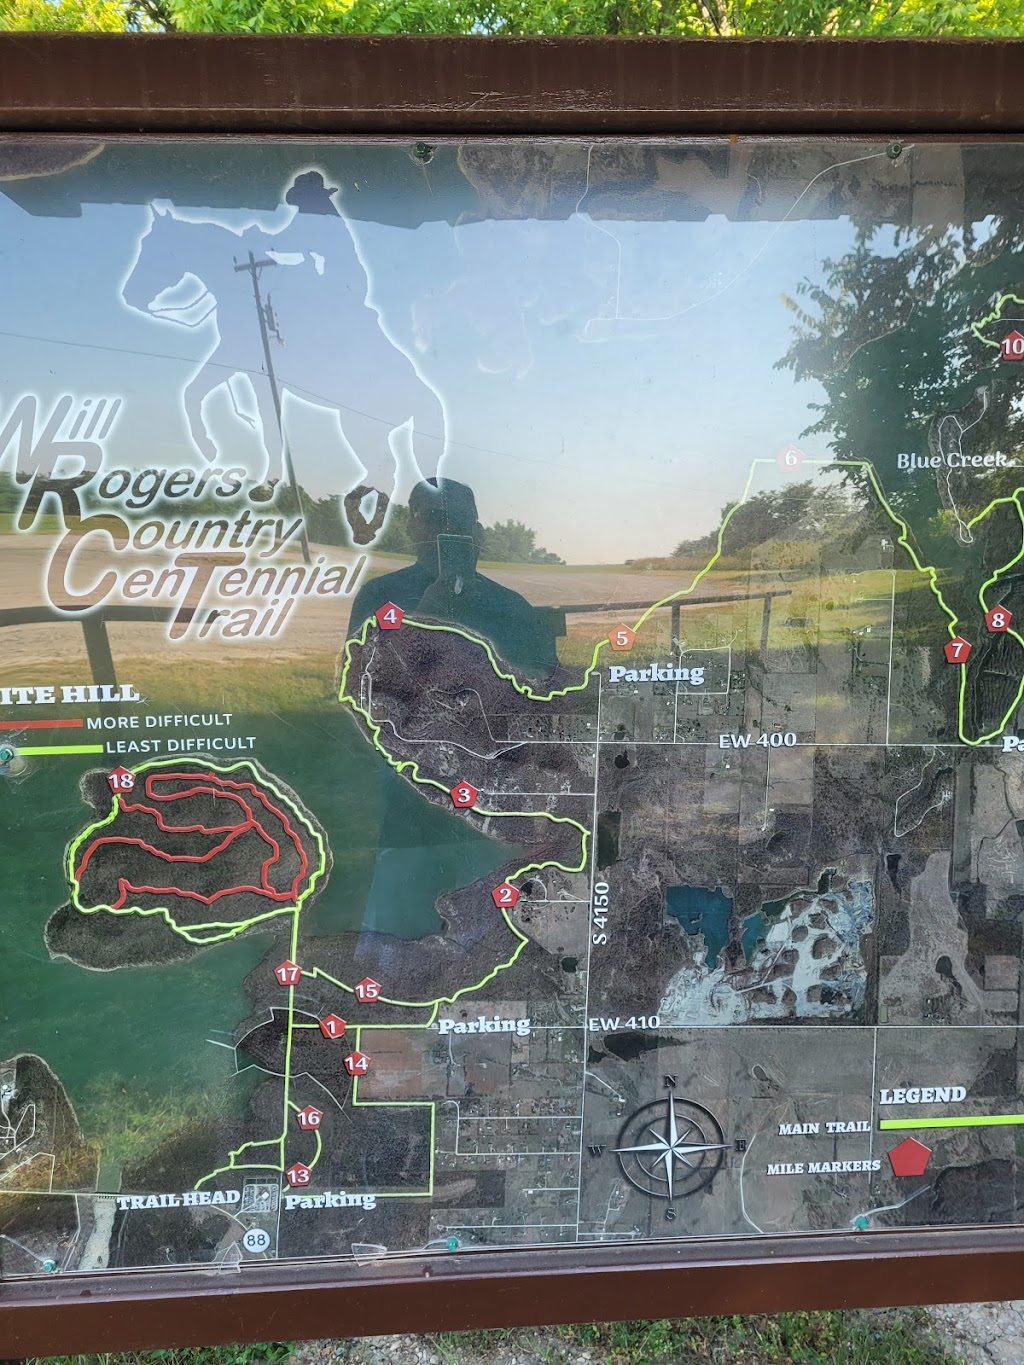 Will Rogers Country Centennial Trail | 10836 OK-88, Claremore, OK 74017, USA | Phone: (918) 443-2250